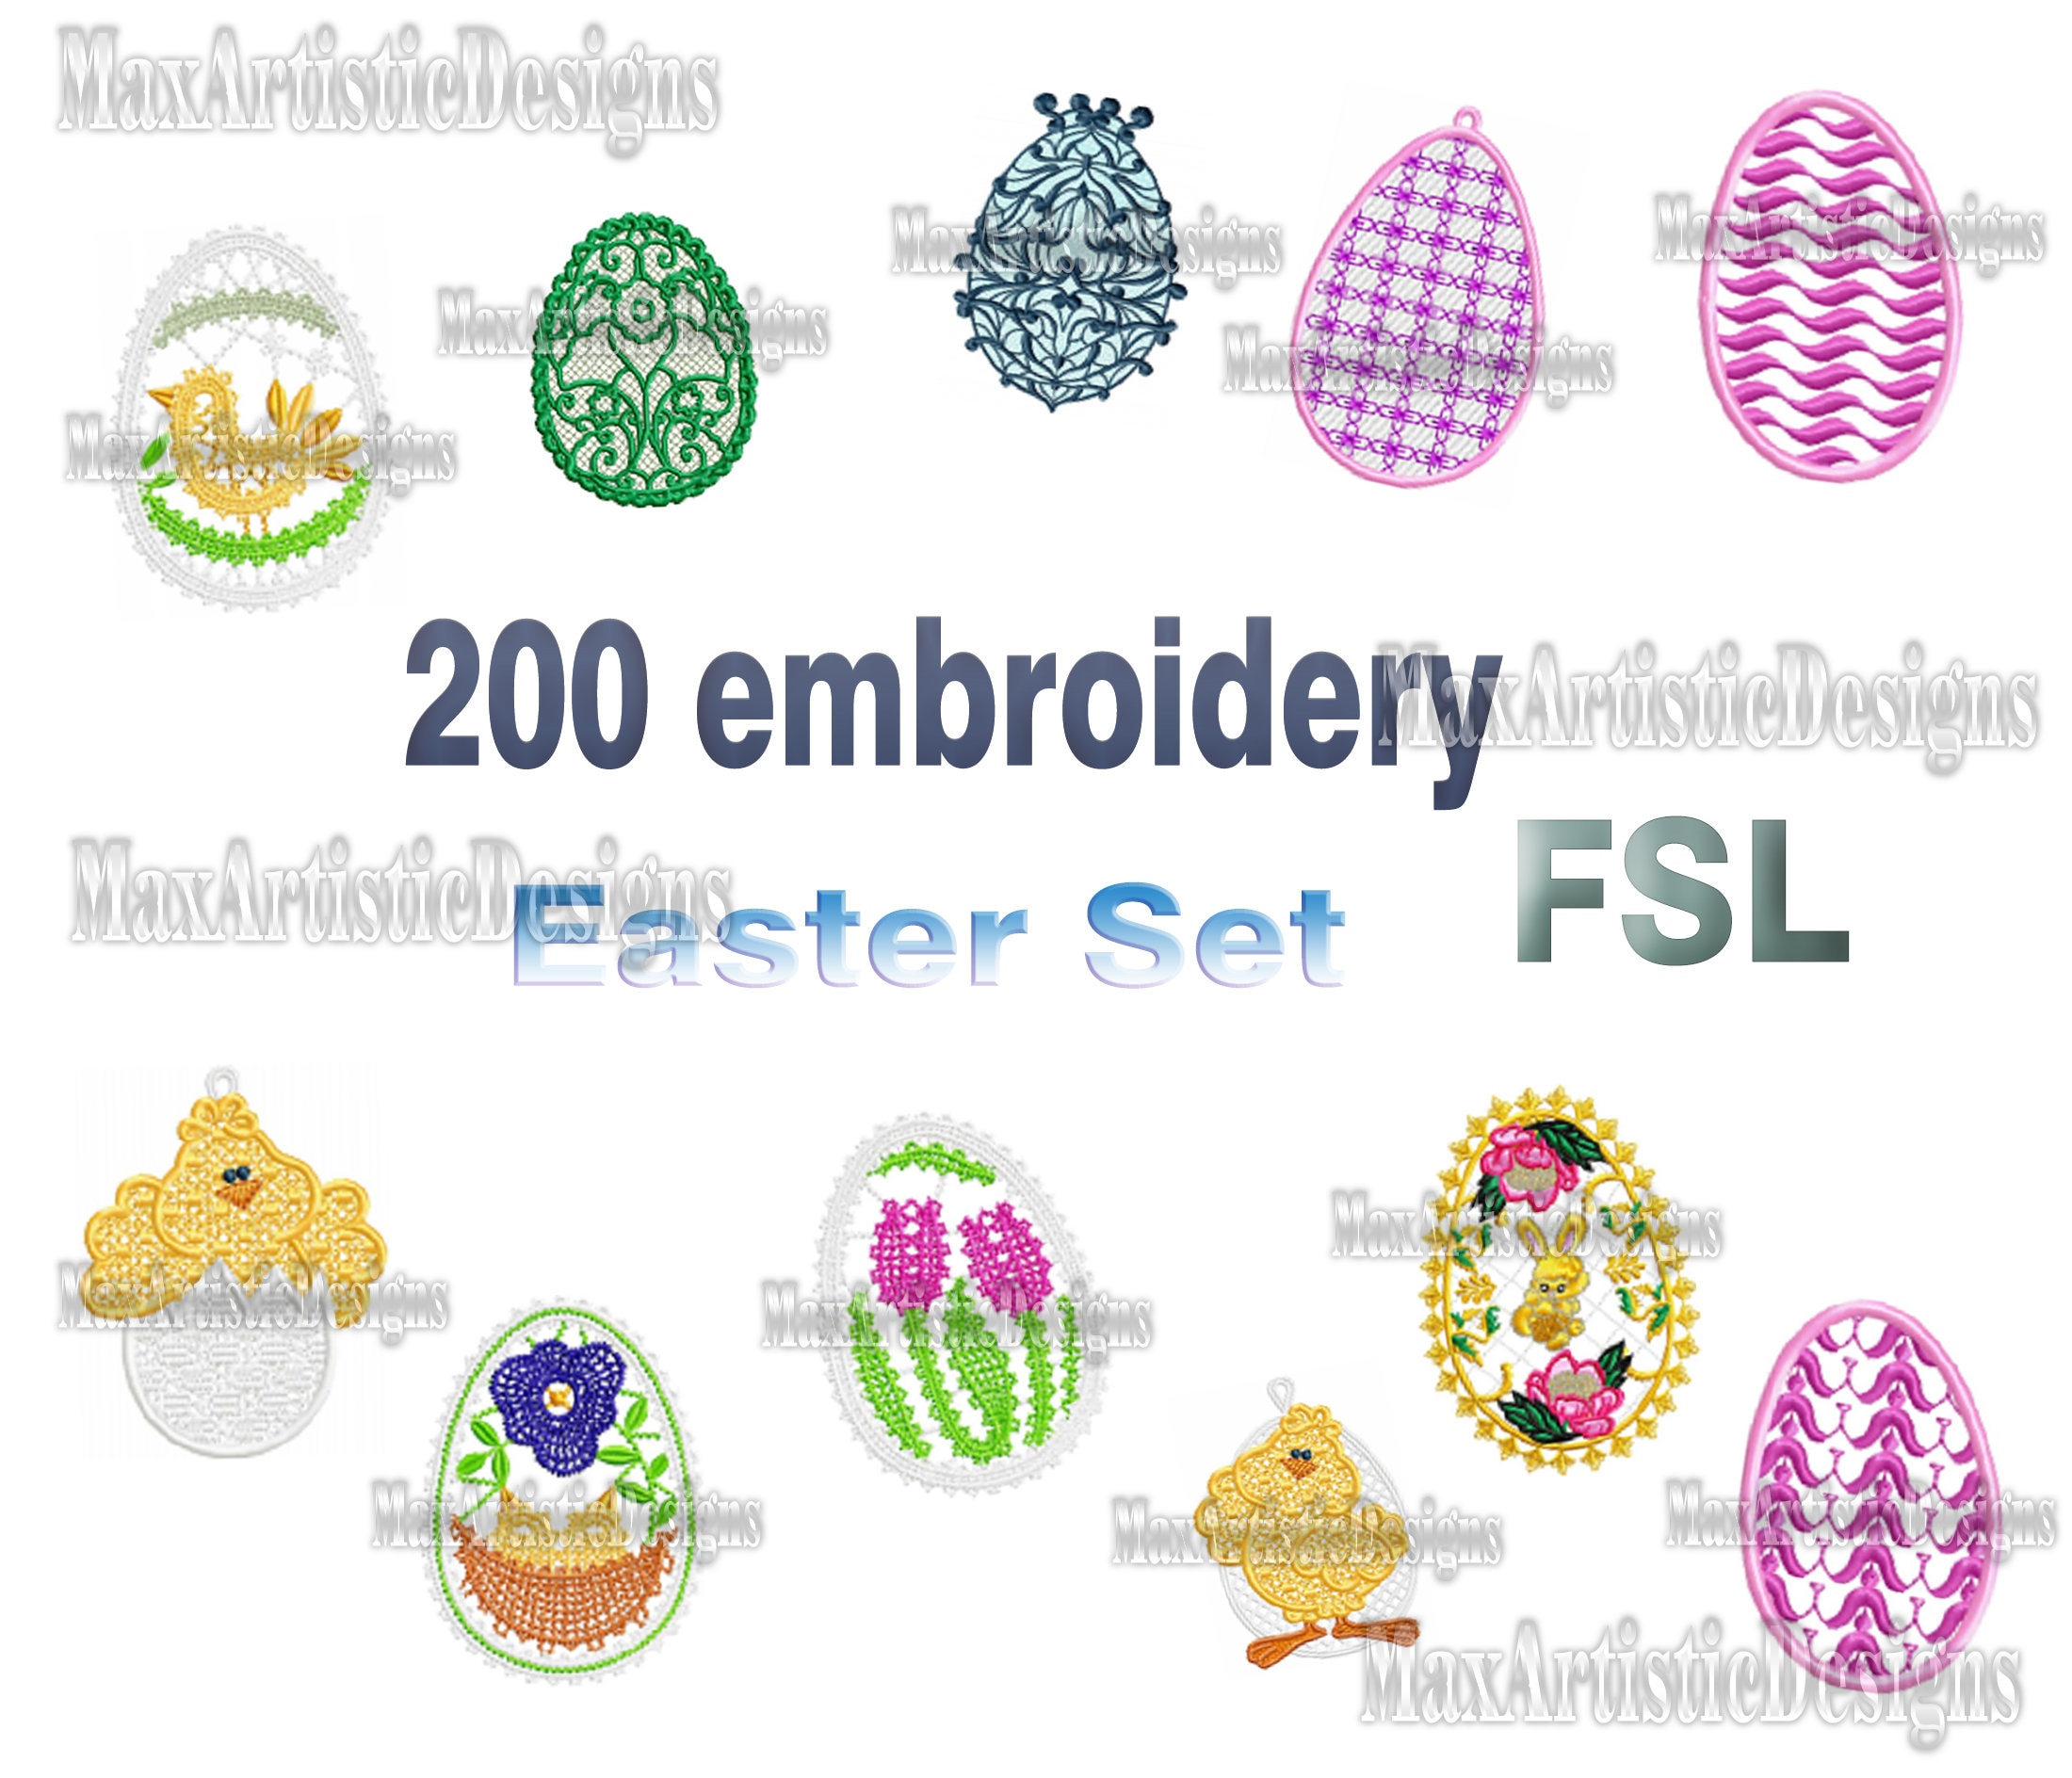 ITH filigree SMALL snowflake embroidery design set – Embrighter